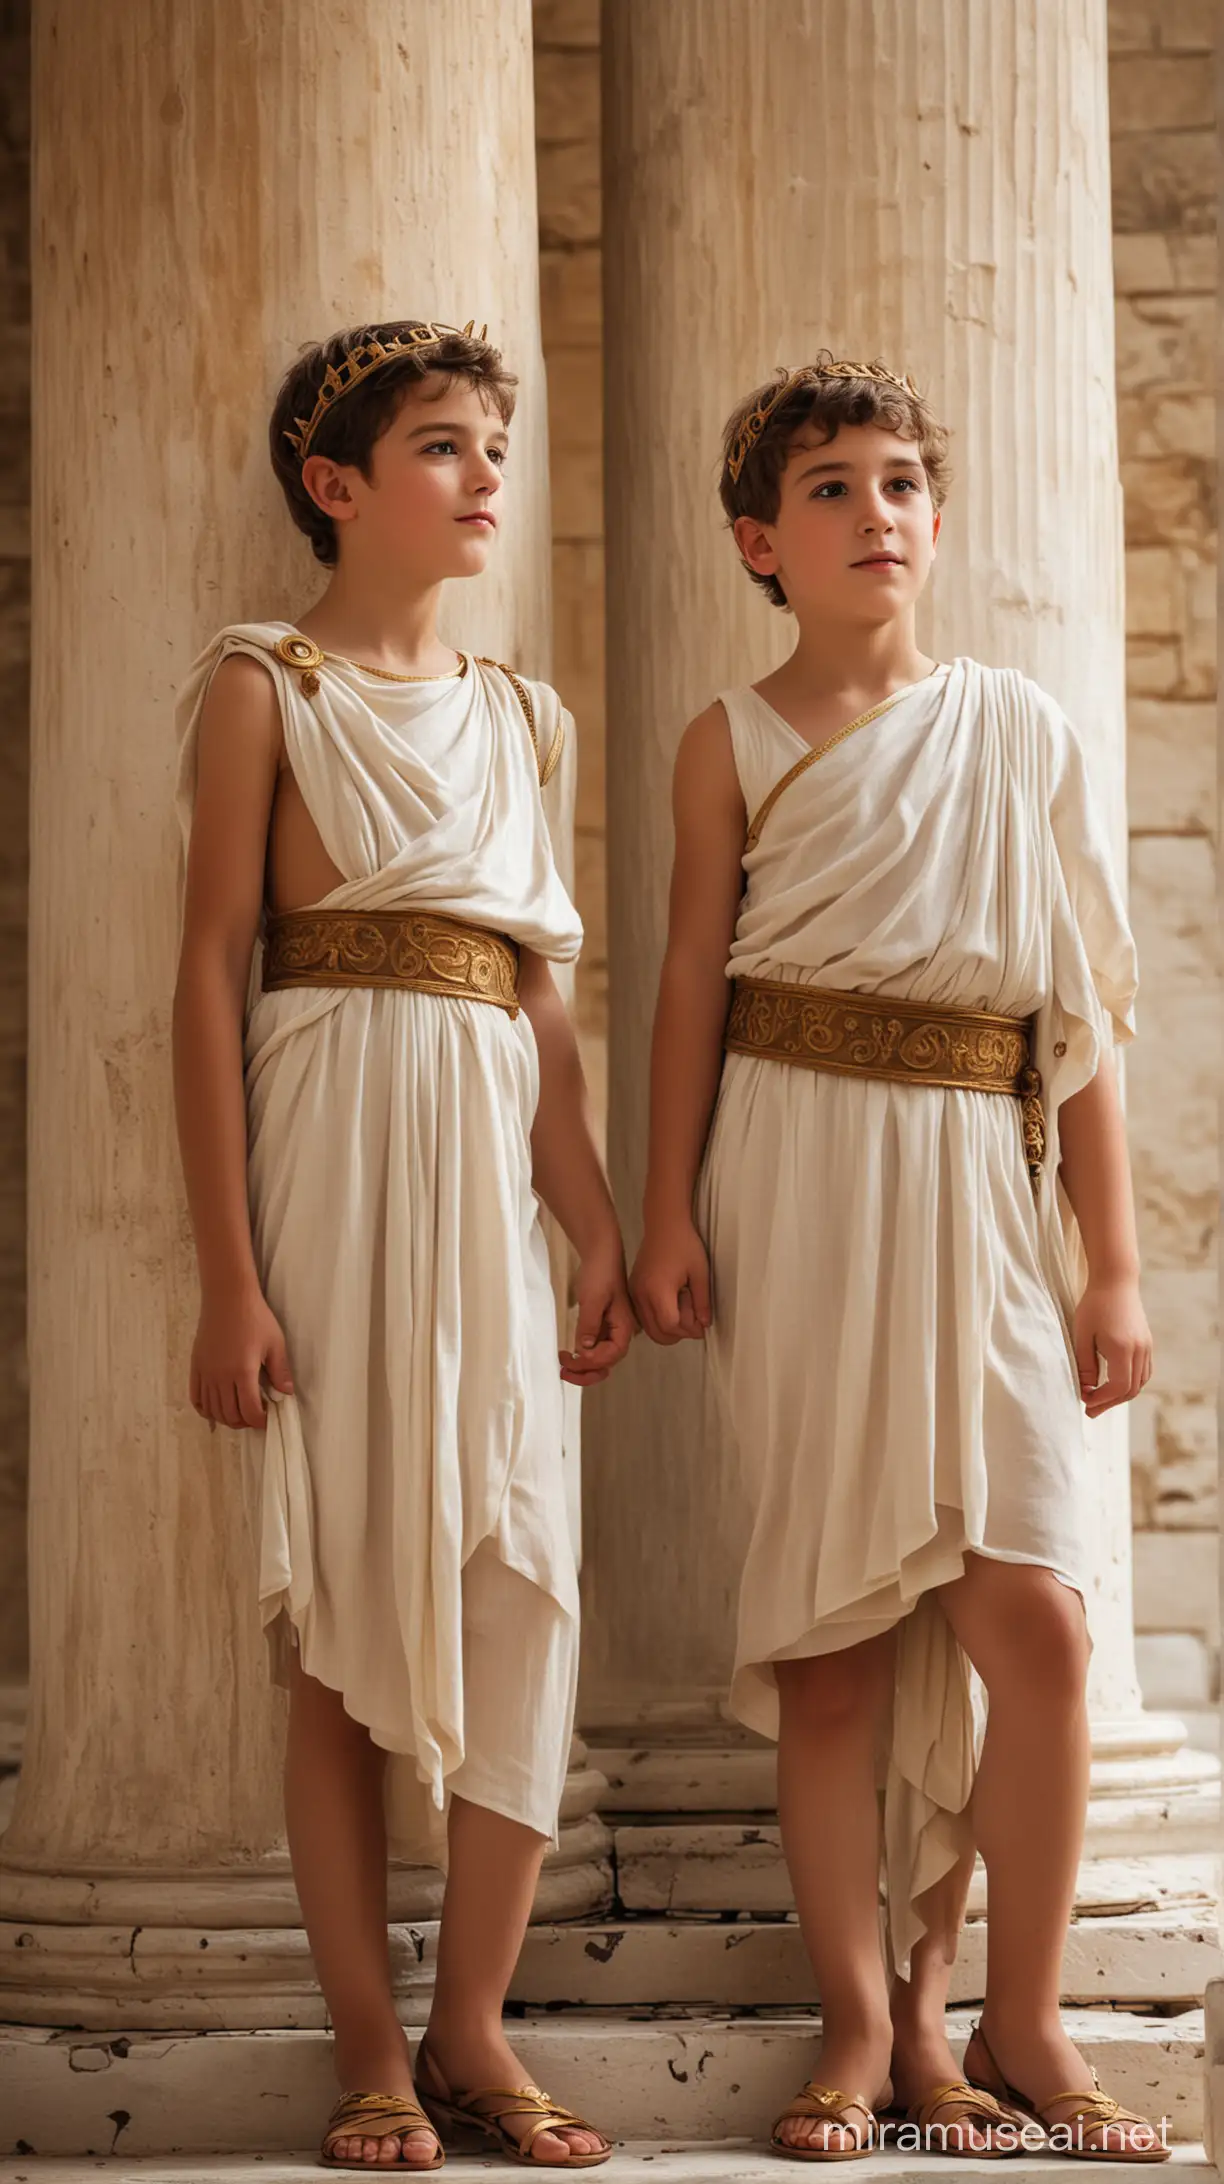 Two Boys Dressed as Ancient Greek Princes in a Timeless Atmosphere